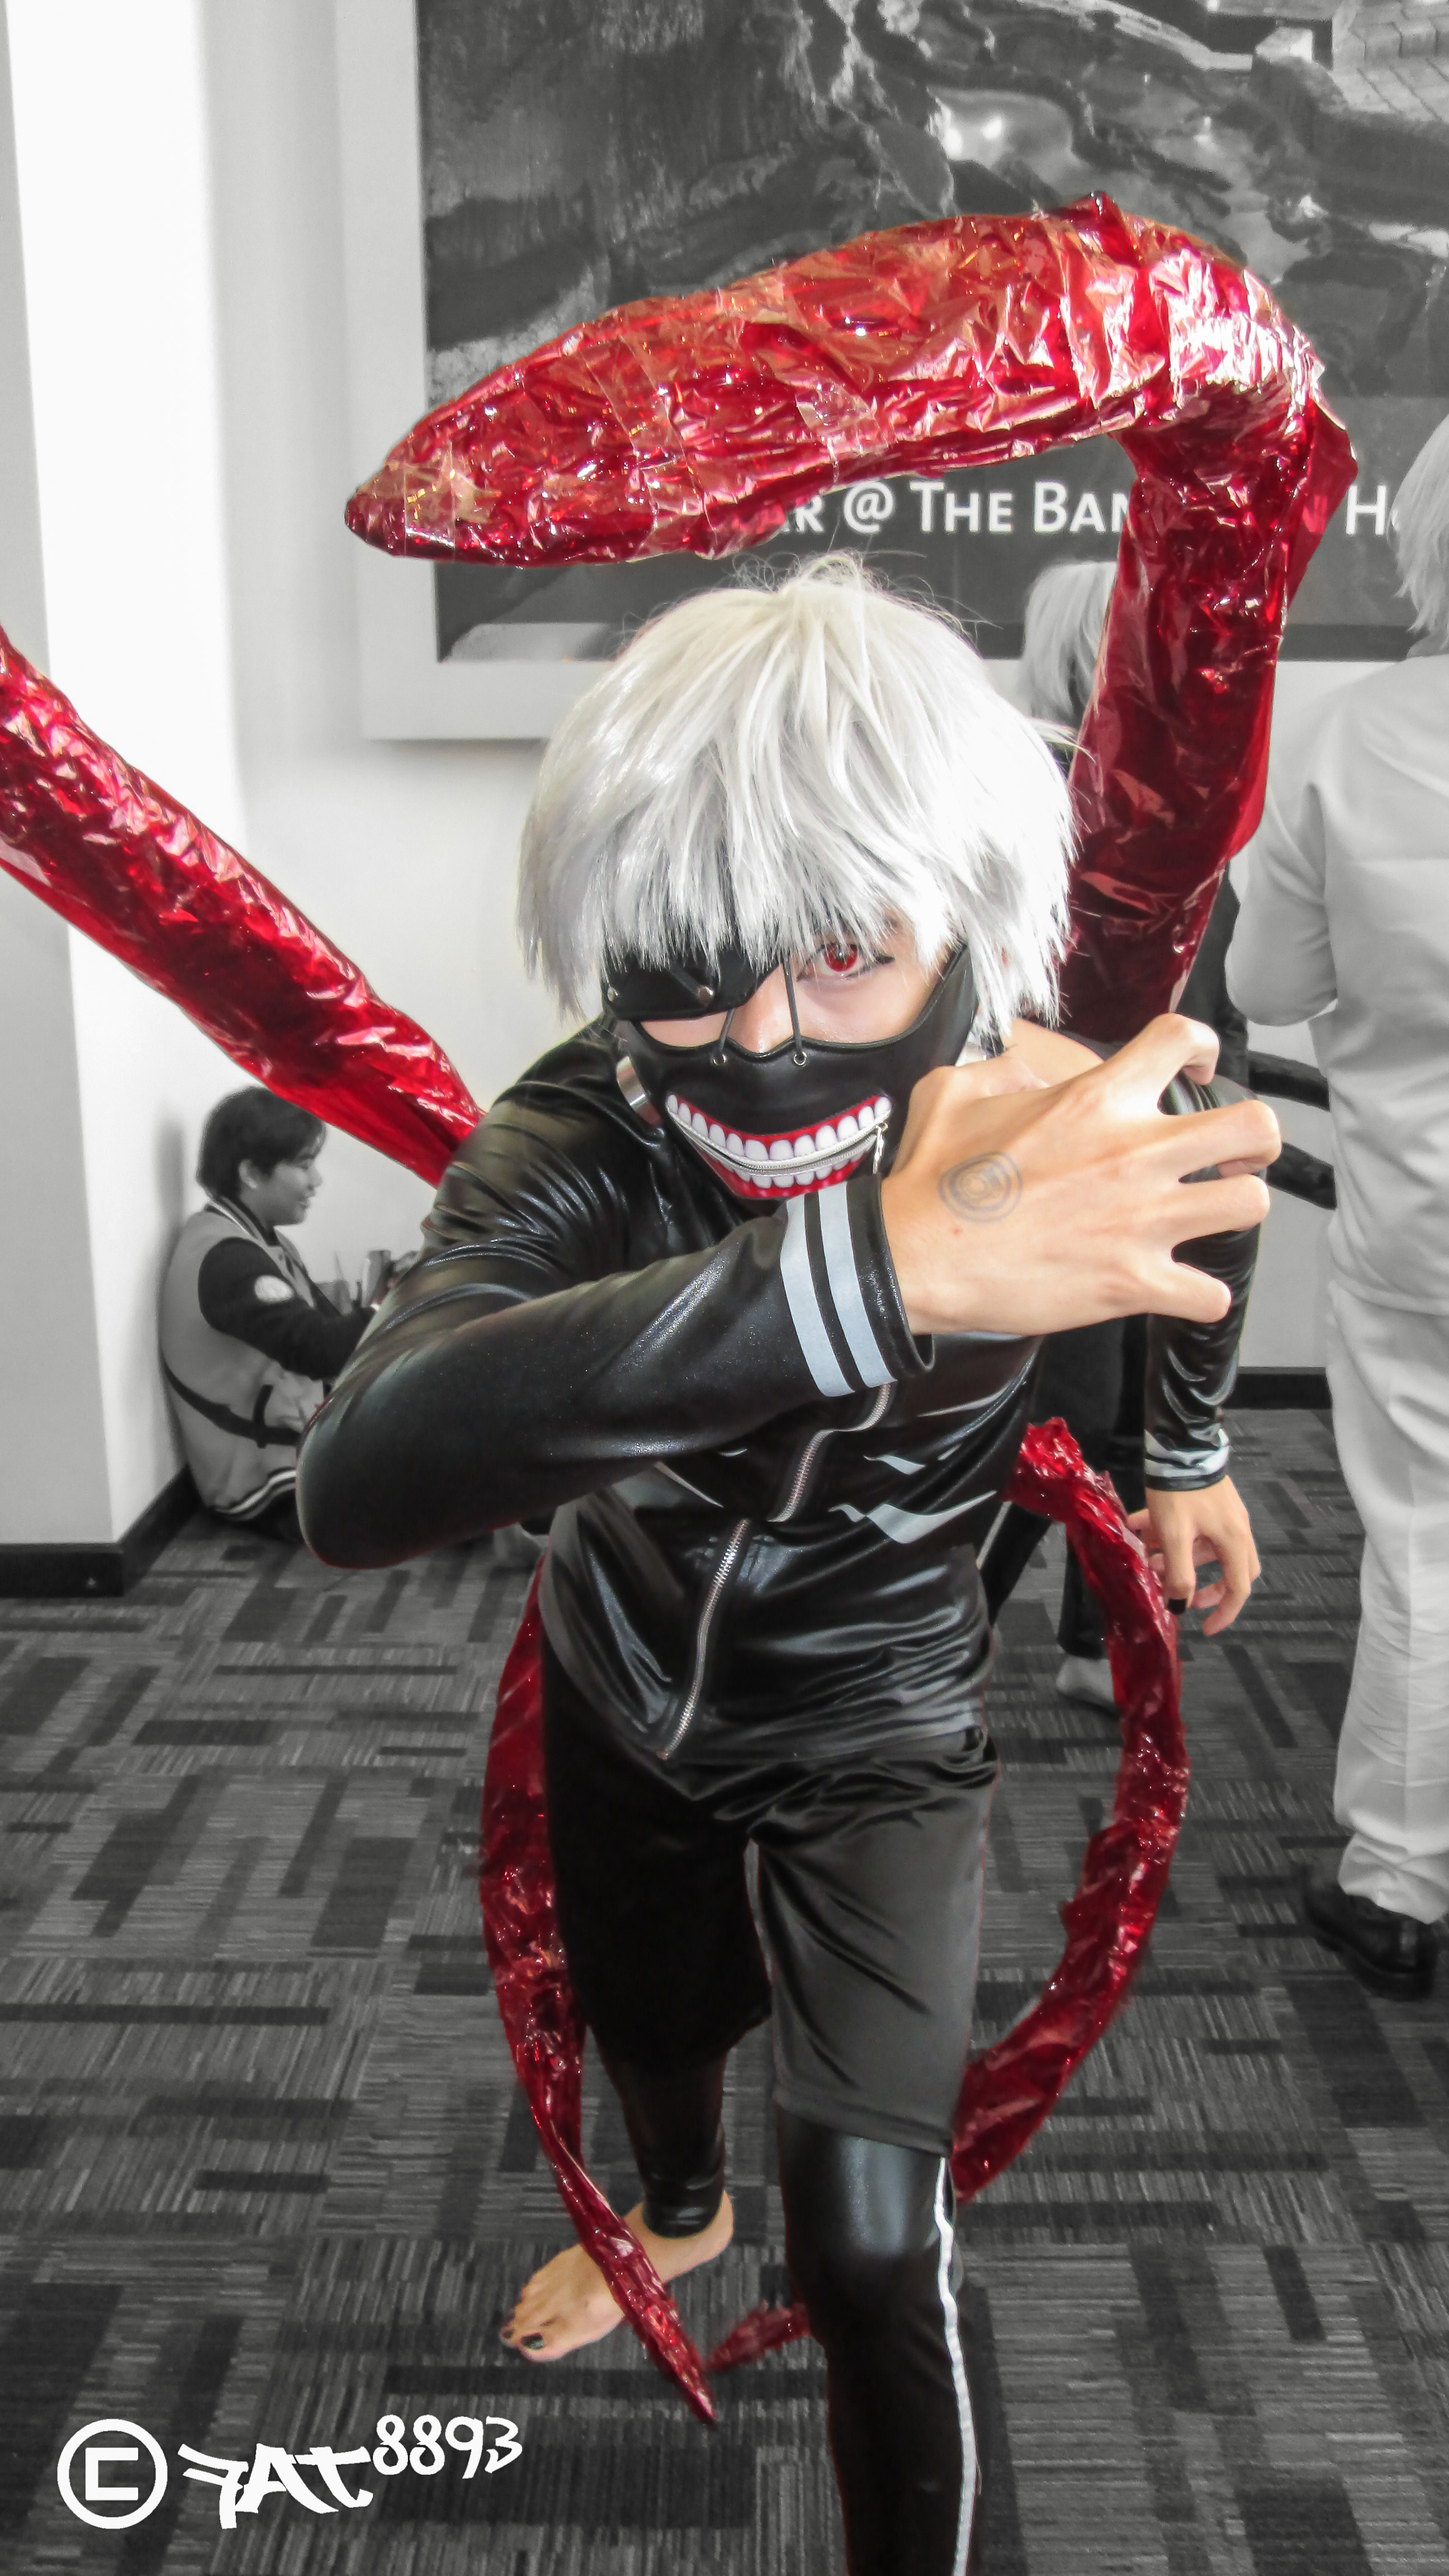 File:Cosplay of Ken Kaneki from Tokyo Ghoul at Animax Carnival Malaysia  2015, Day 1 008 (16799806938).jpg - Wikimedia Commons